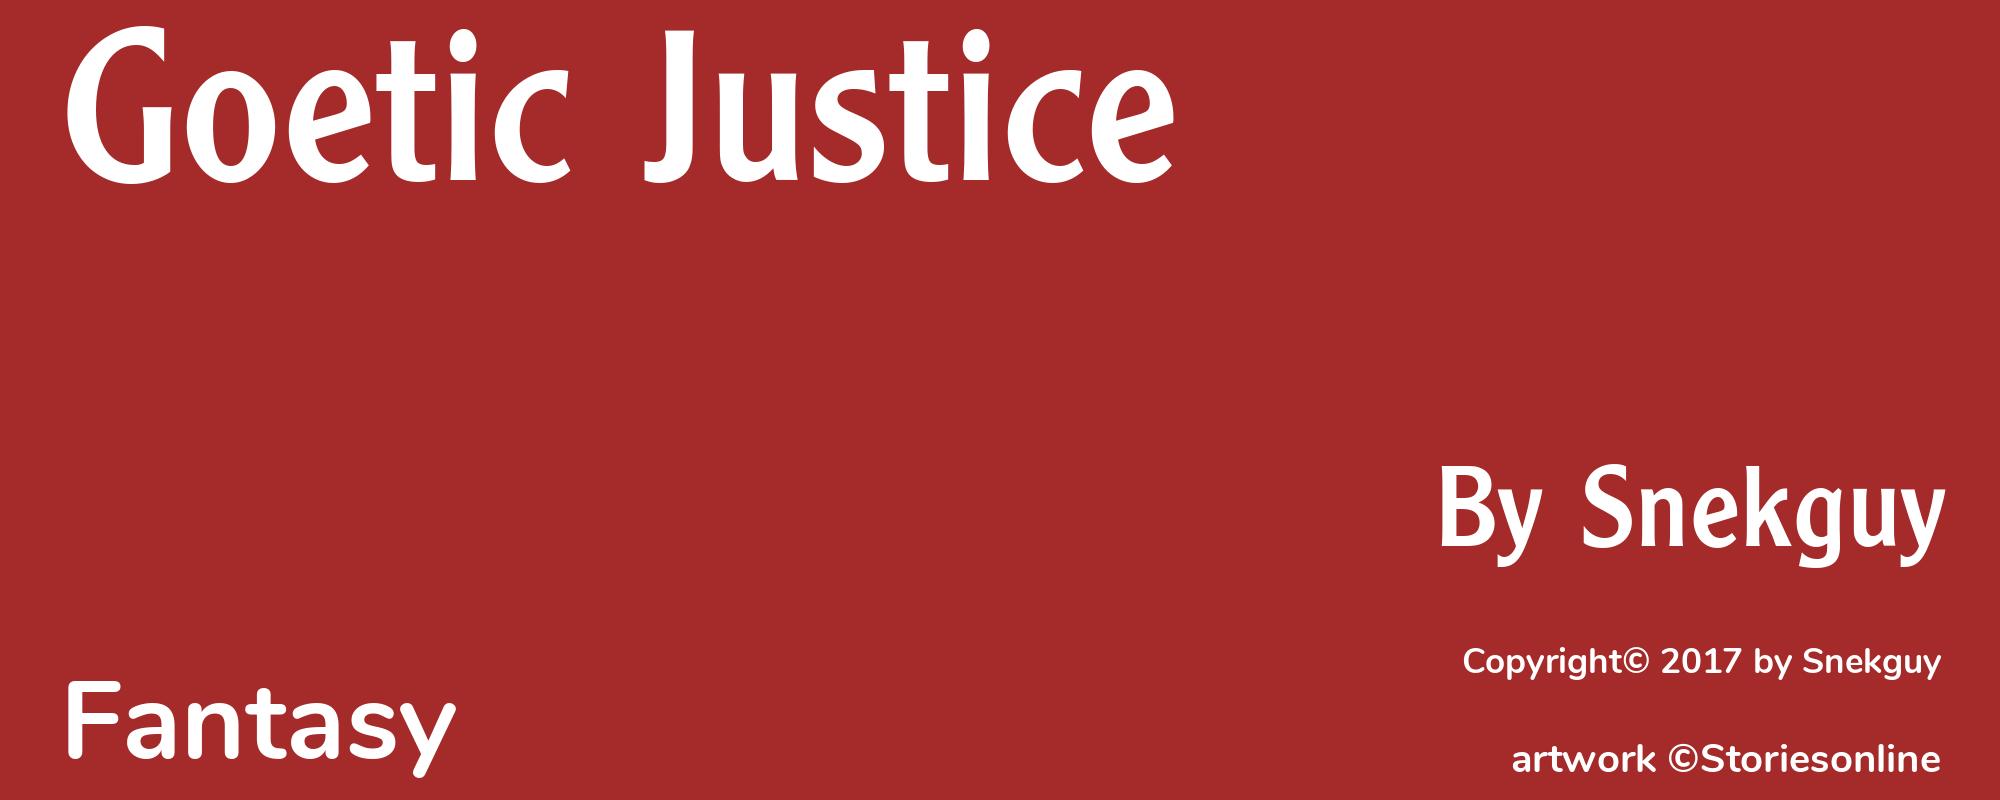 Goetic Justice - Cover